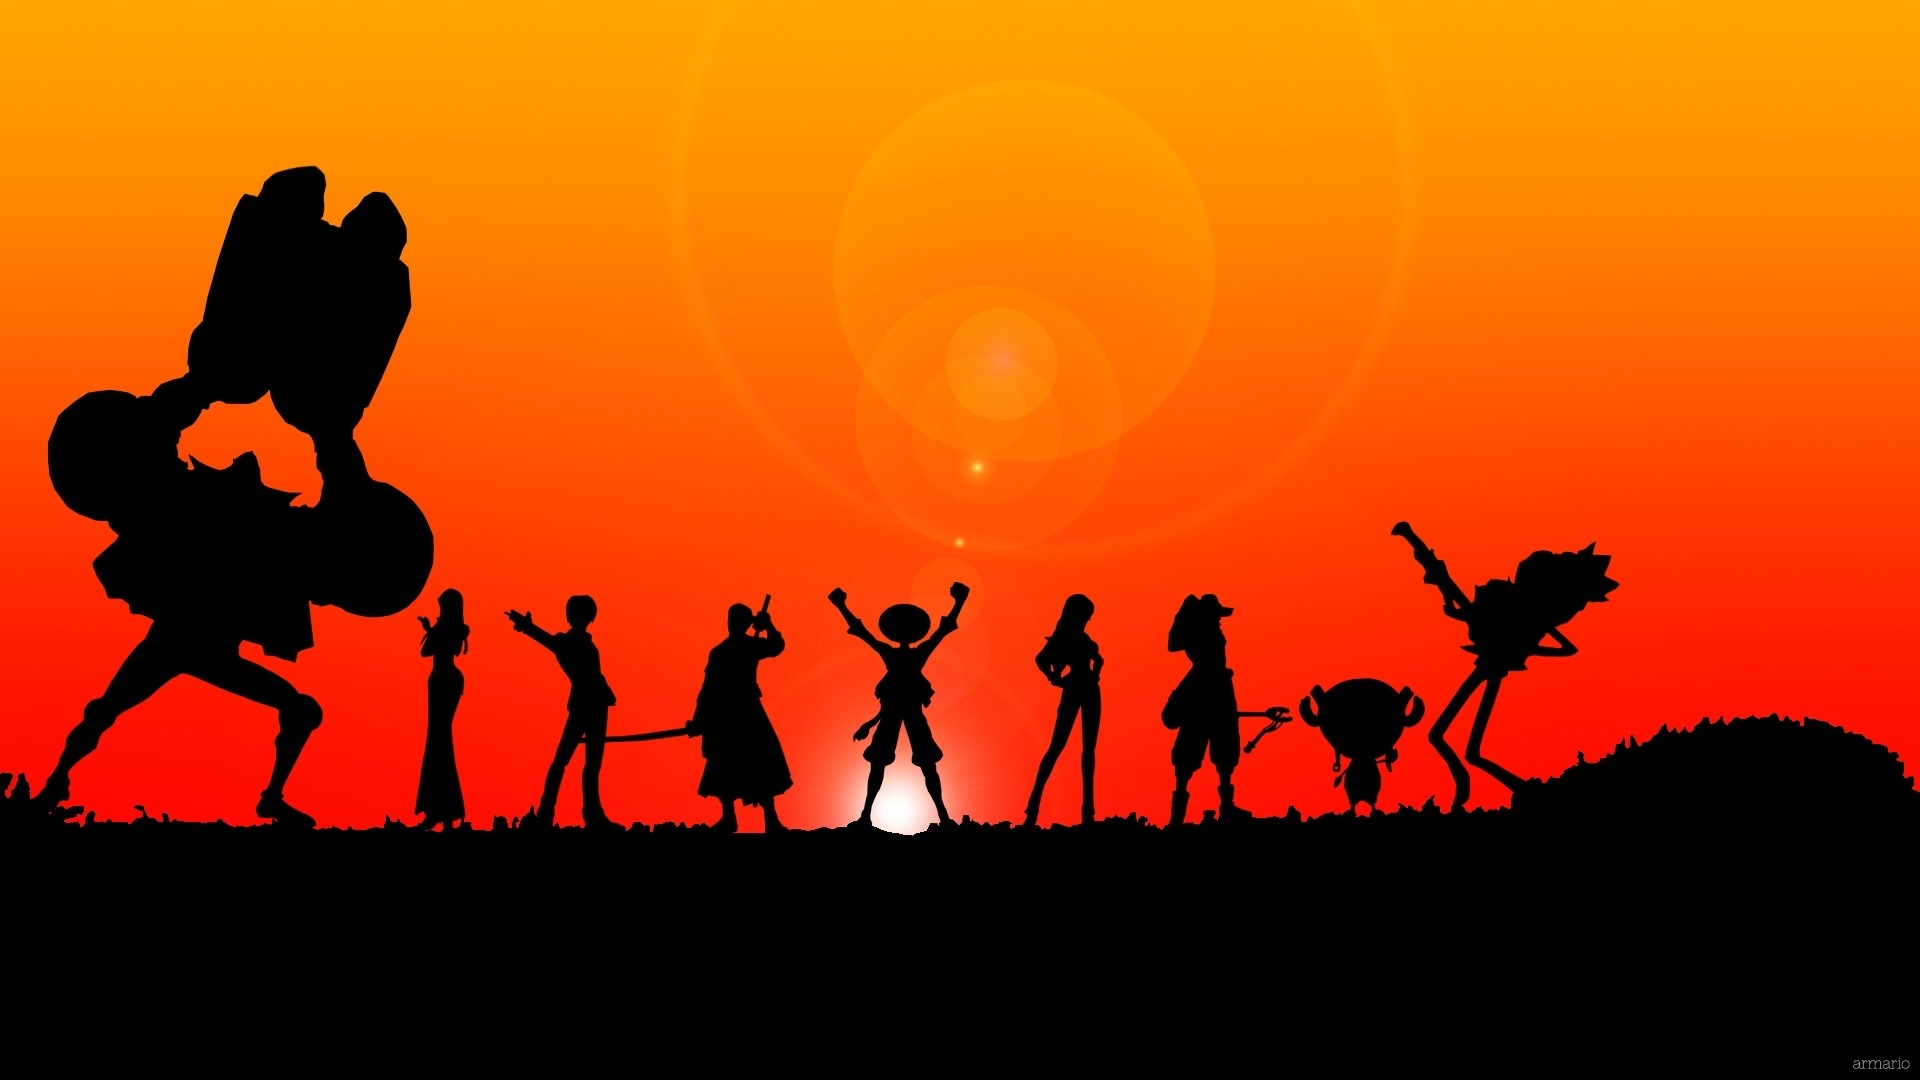 One Piece Anime Sunset Orange Wallpapers Hd Desktop And Mobile Backgrounds